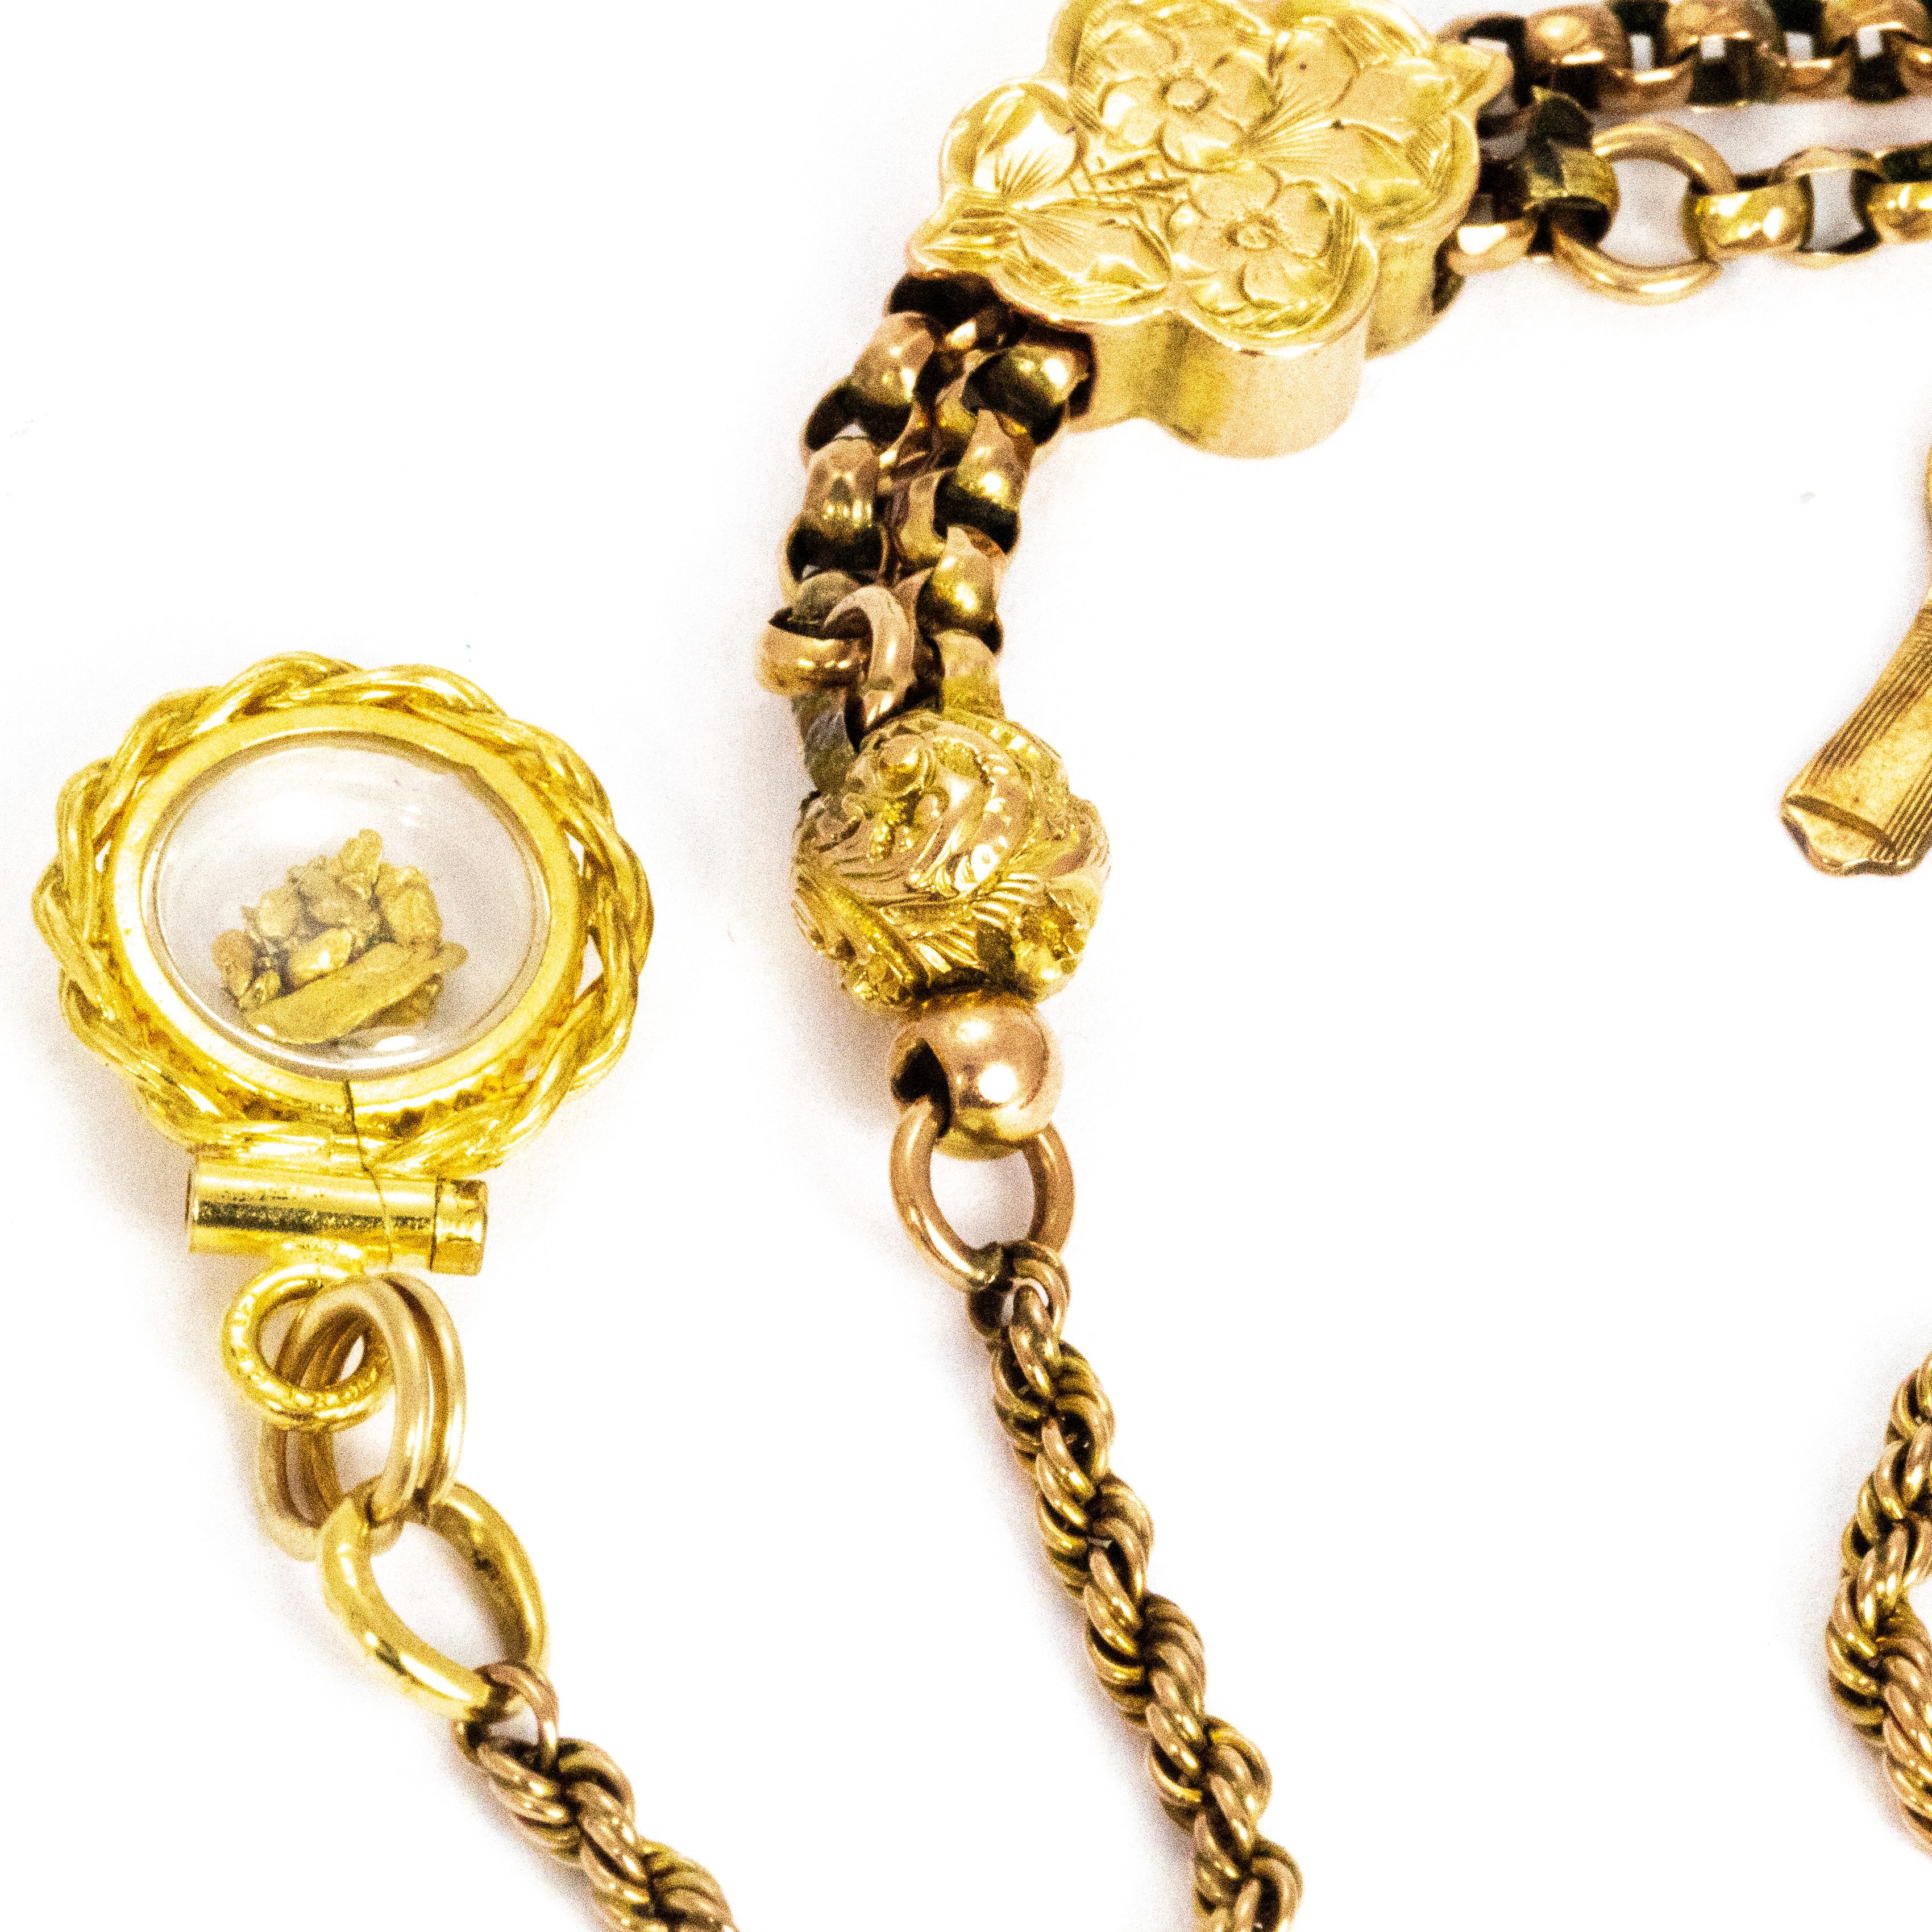 The charms on this bracelet are absolutely darling. The rope twist chain holds a glass compartment which holds gild nuggets and the other side holds the dog clip. At he centre is a double chain with a sliding gold bead and a sweet little gent charm.